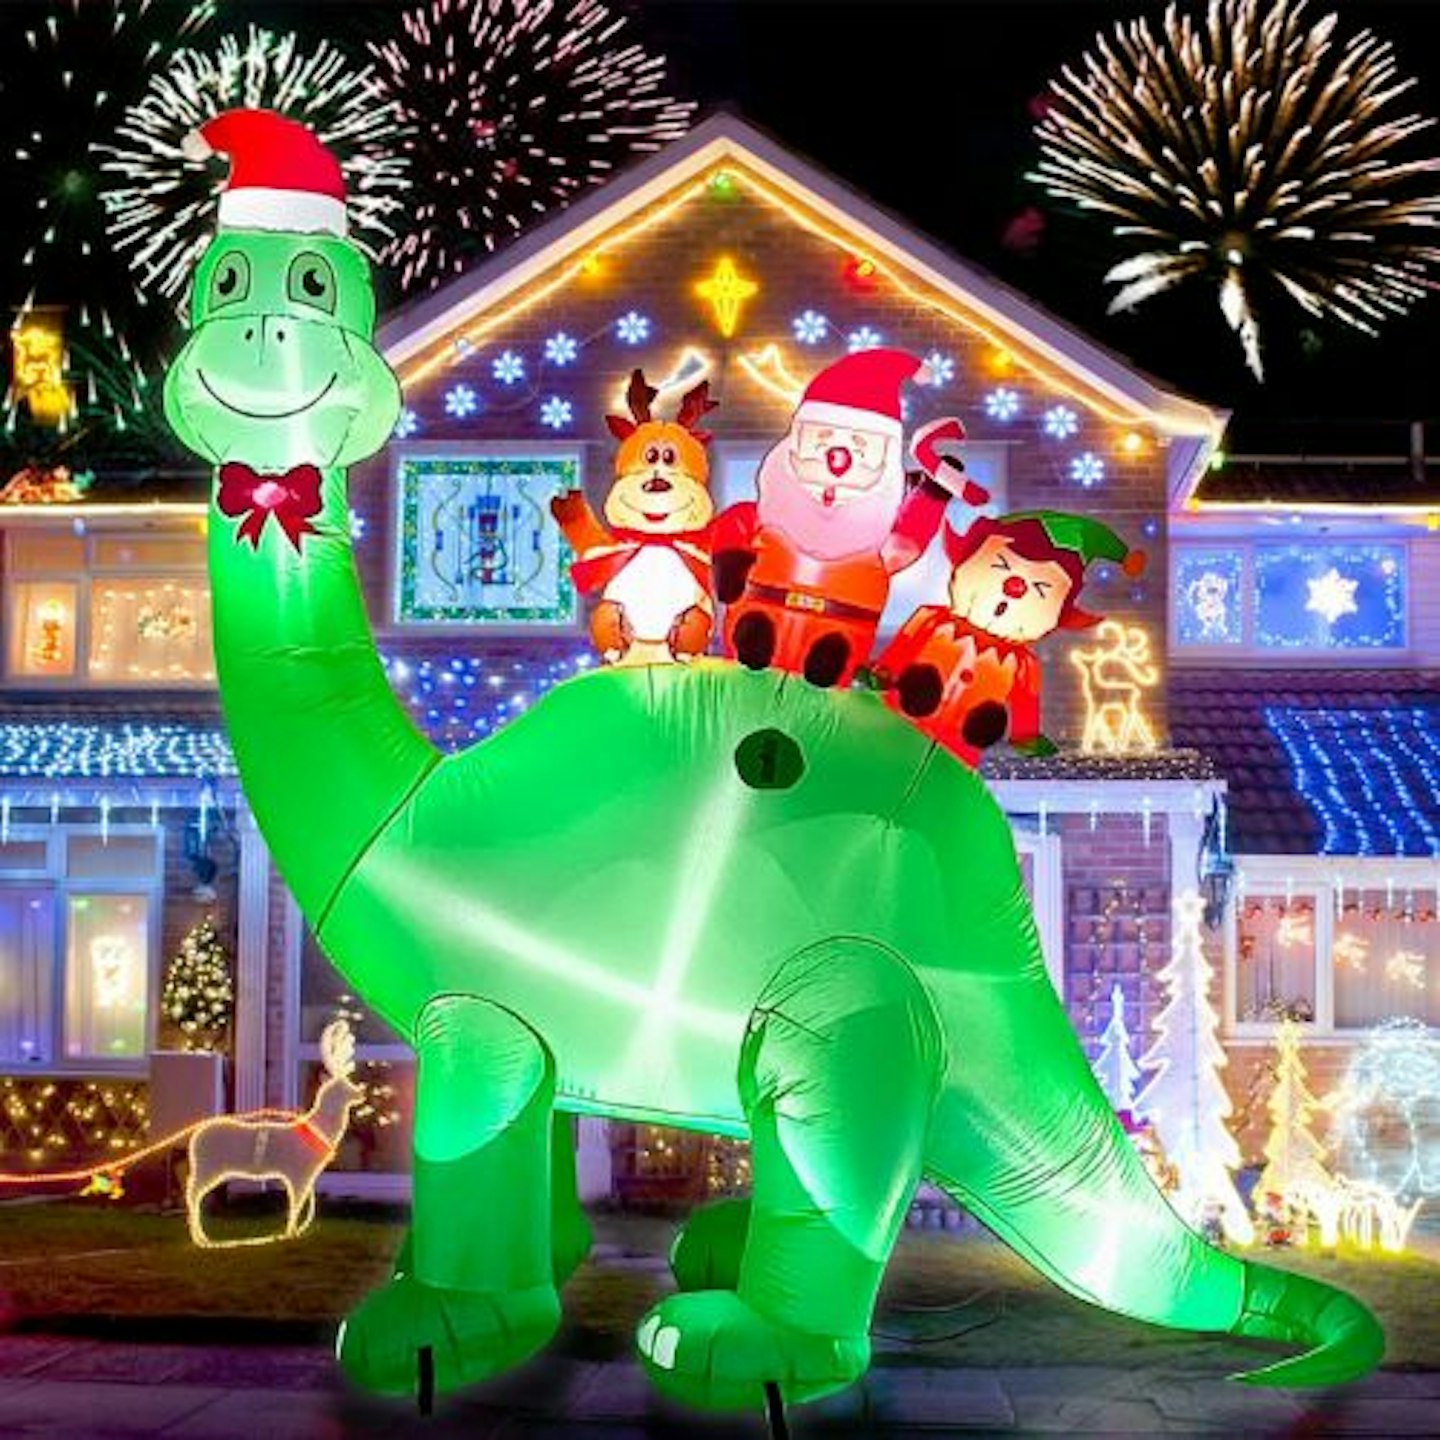 6.7 Feet Tall Christmas Inflatables, Kalolary Christmas Inflatables Dinosaur with Elf Reindeer Santa Claus Blow up Xmas Outdoor Indoor Decoration for Home...